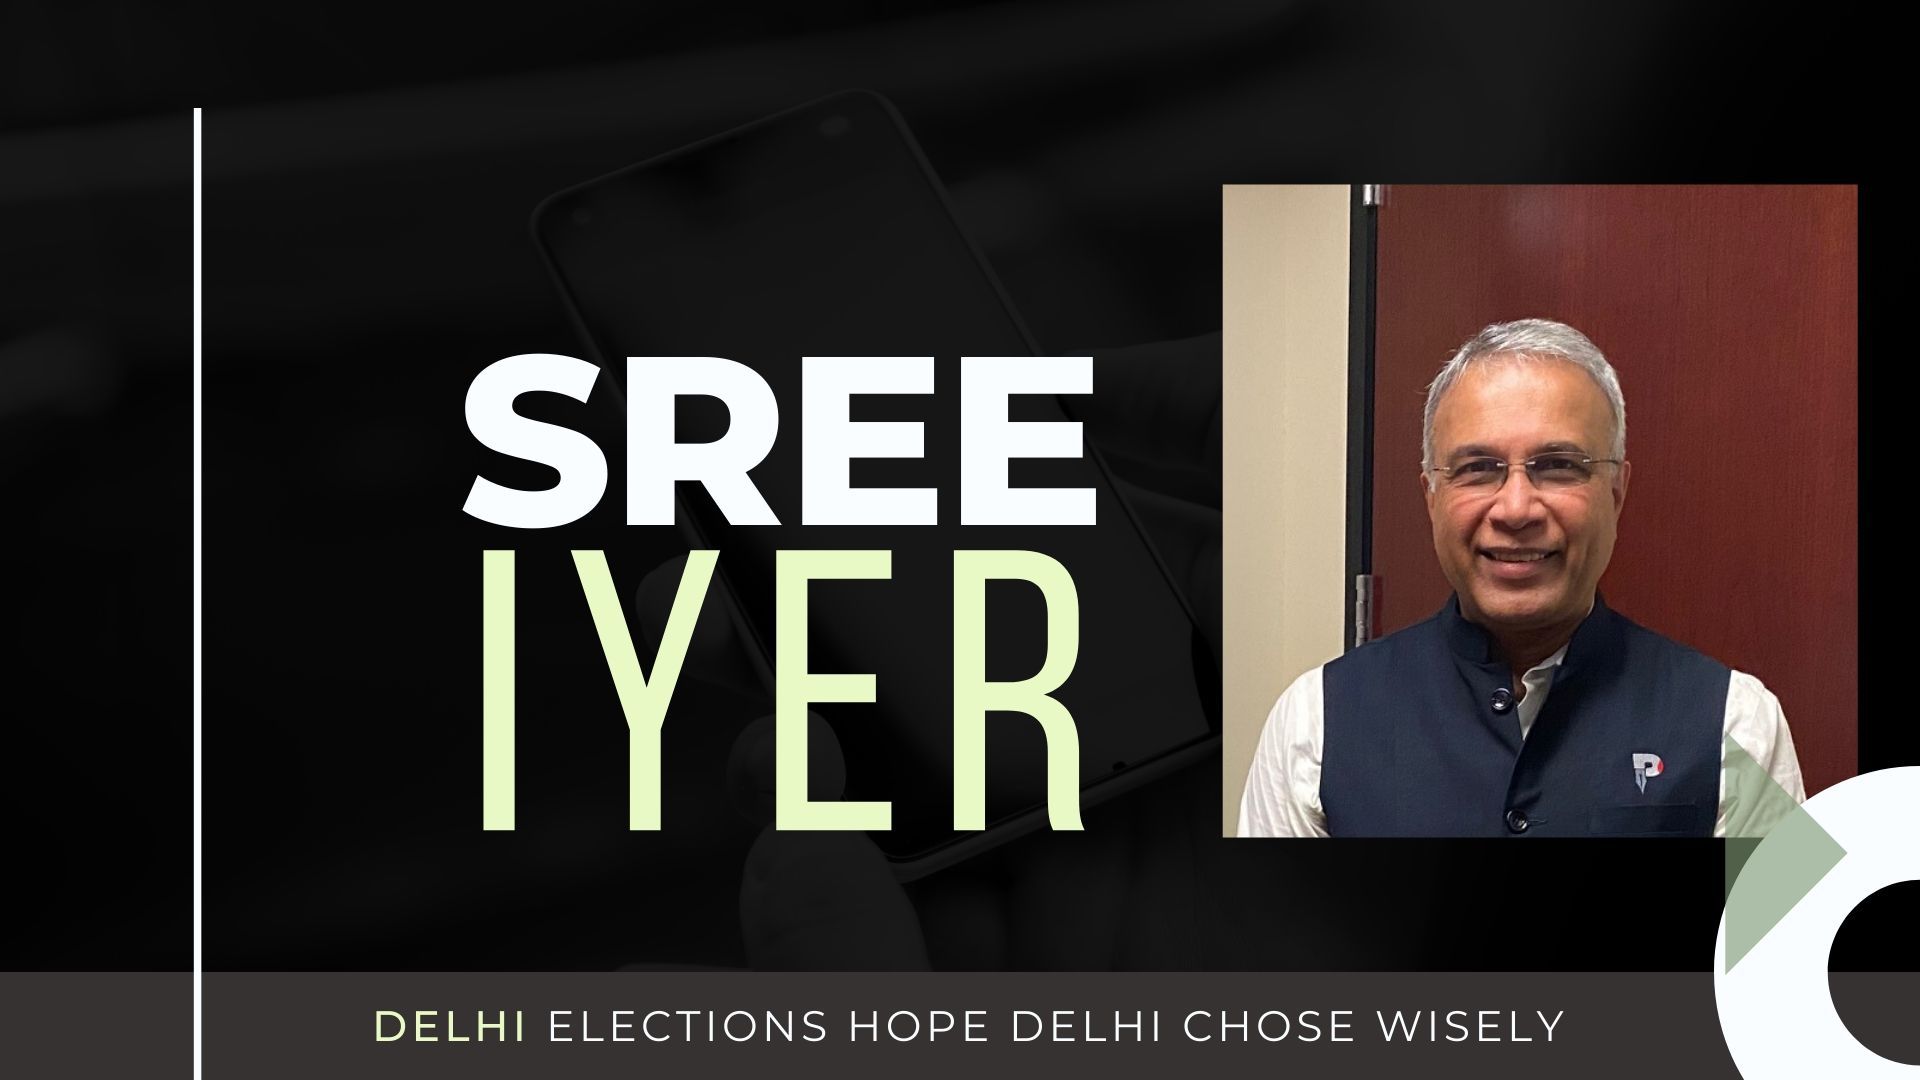 Is the Delhi election going to be decided based on the Anti-CAA/ Shaheen Bagh protests or is the electorate going to look at AAP's 5-year performance? What about BJP? How was their Law and Order record in Delhi? A thought provoking talk by Sree Iyer